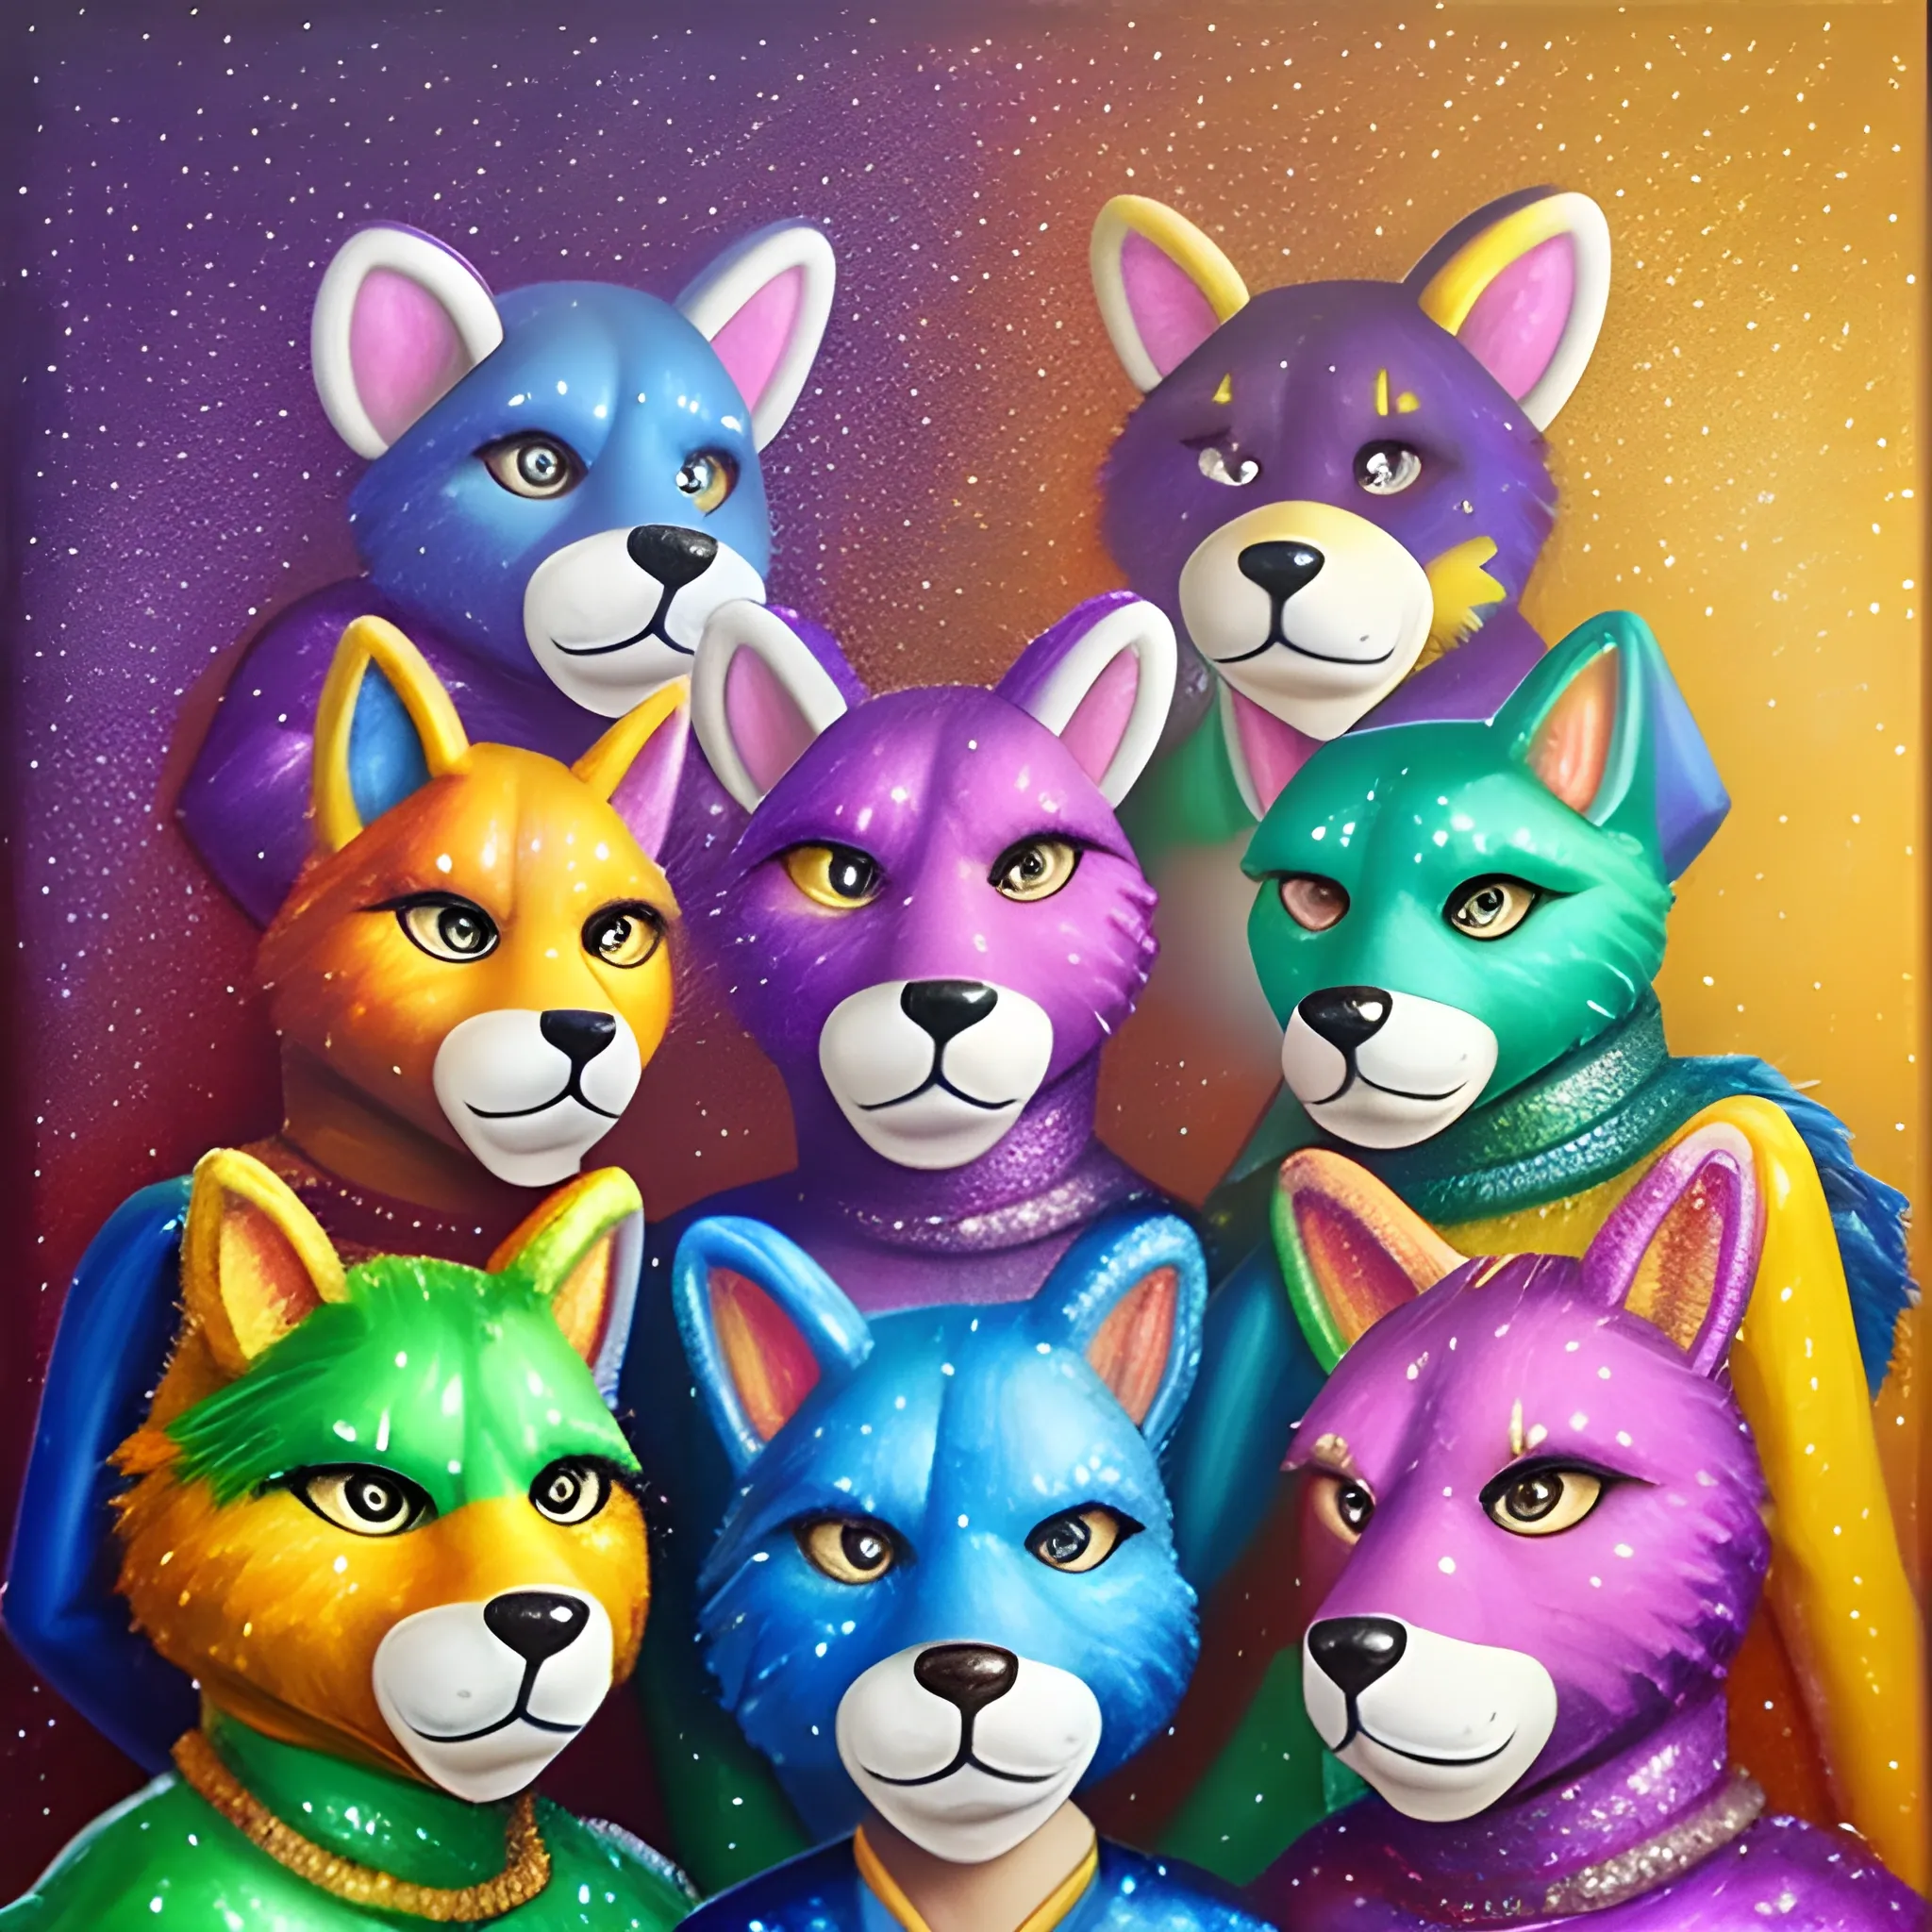 A group of fursuiters turned into glitter, Oil Painting